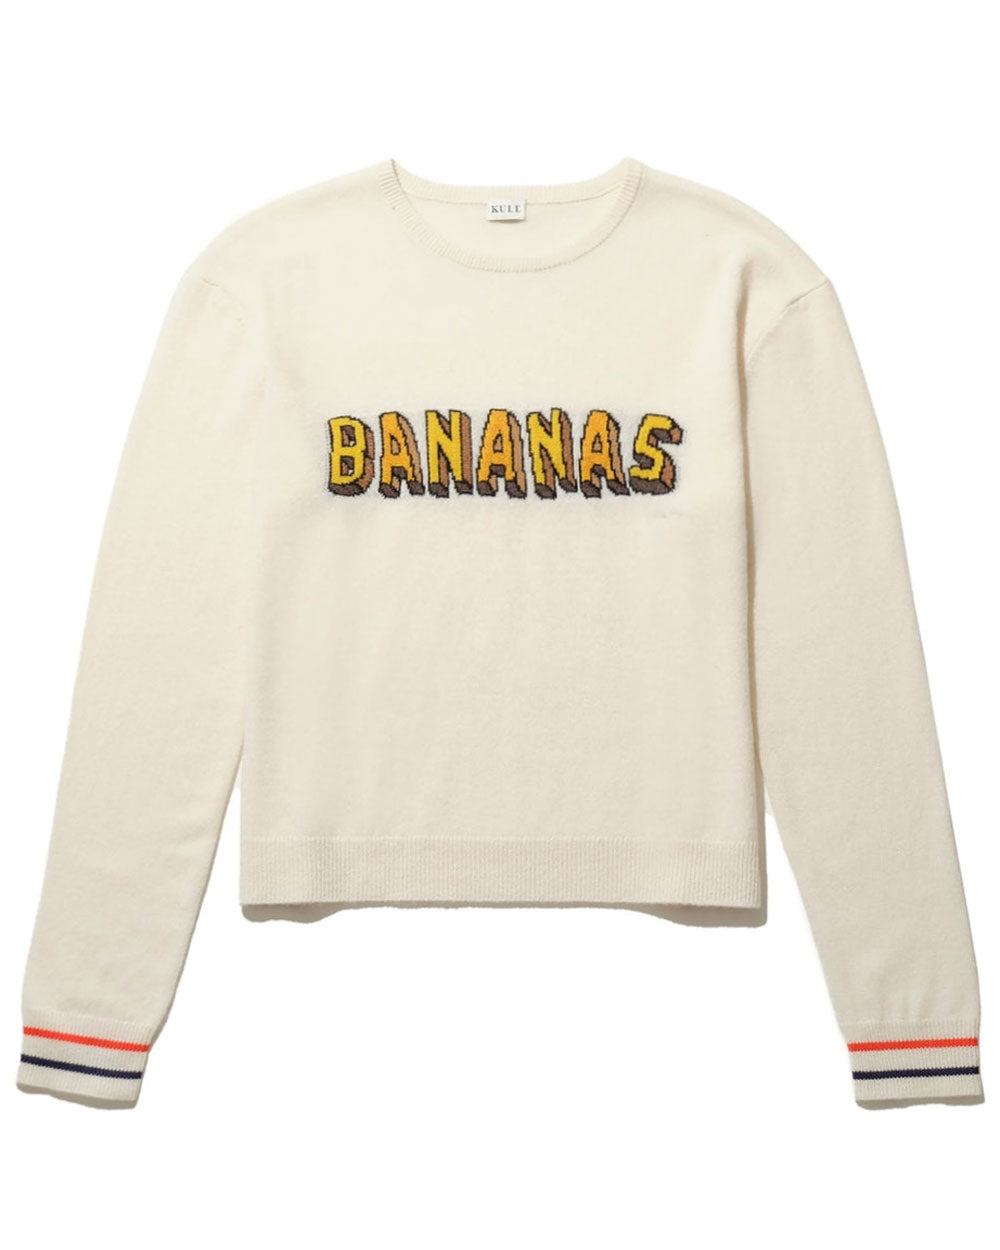 The Bananas Pullover in Cream